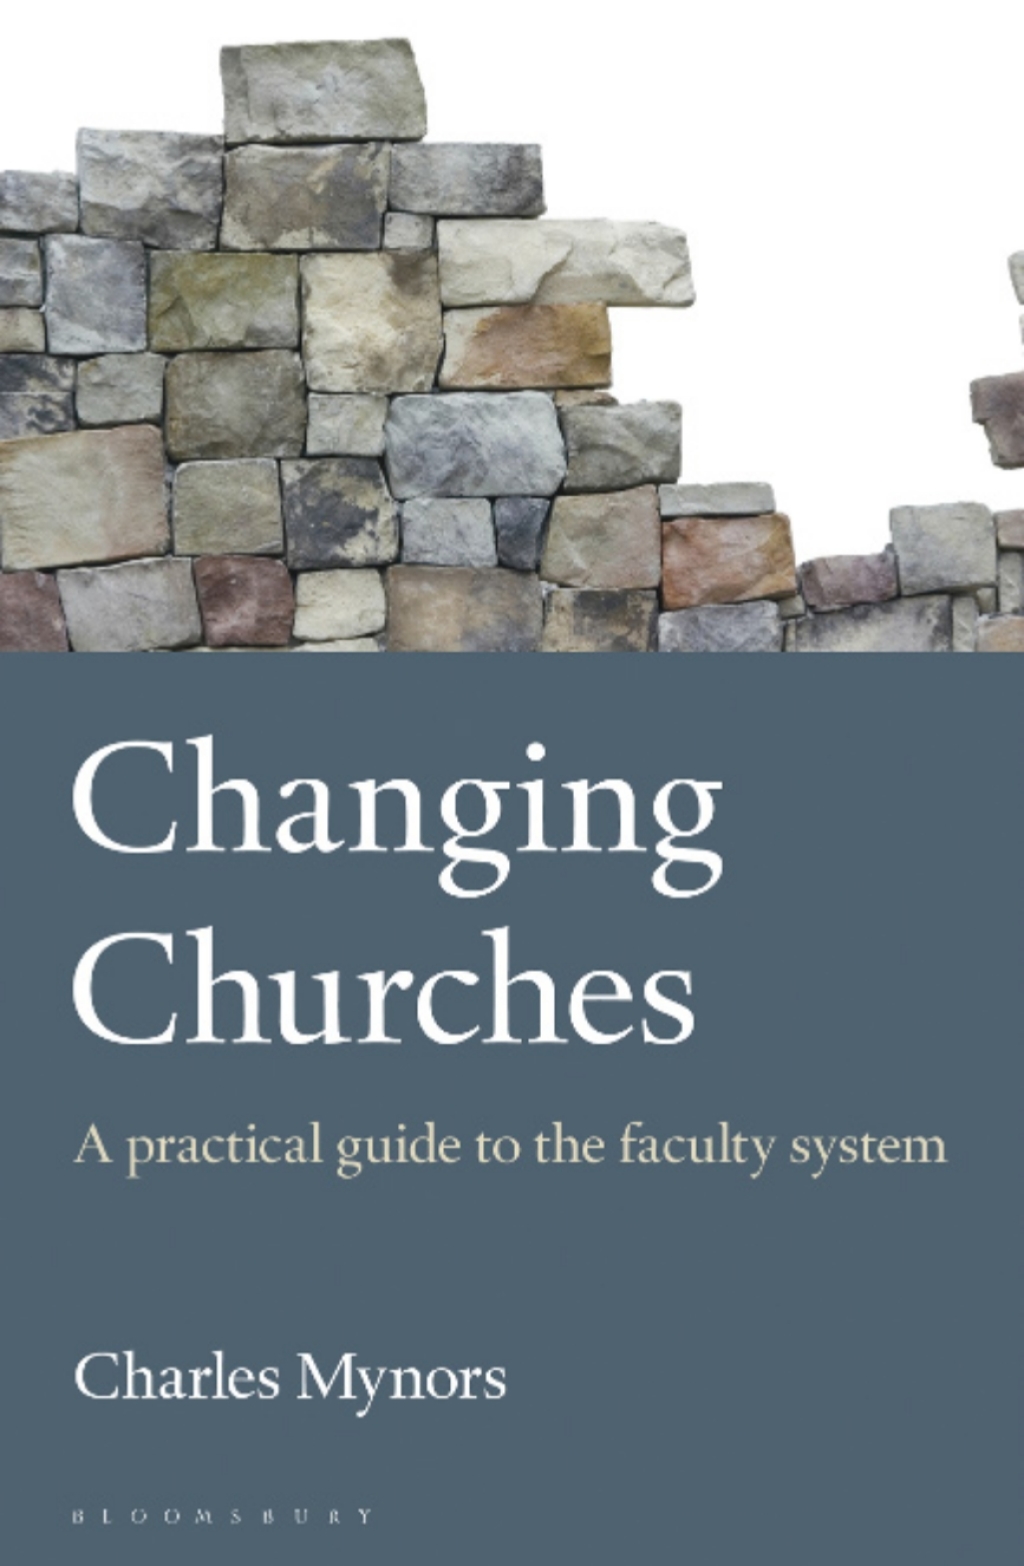 Changing Churches (eBook) - Charles Mynors